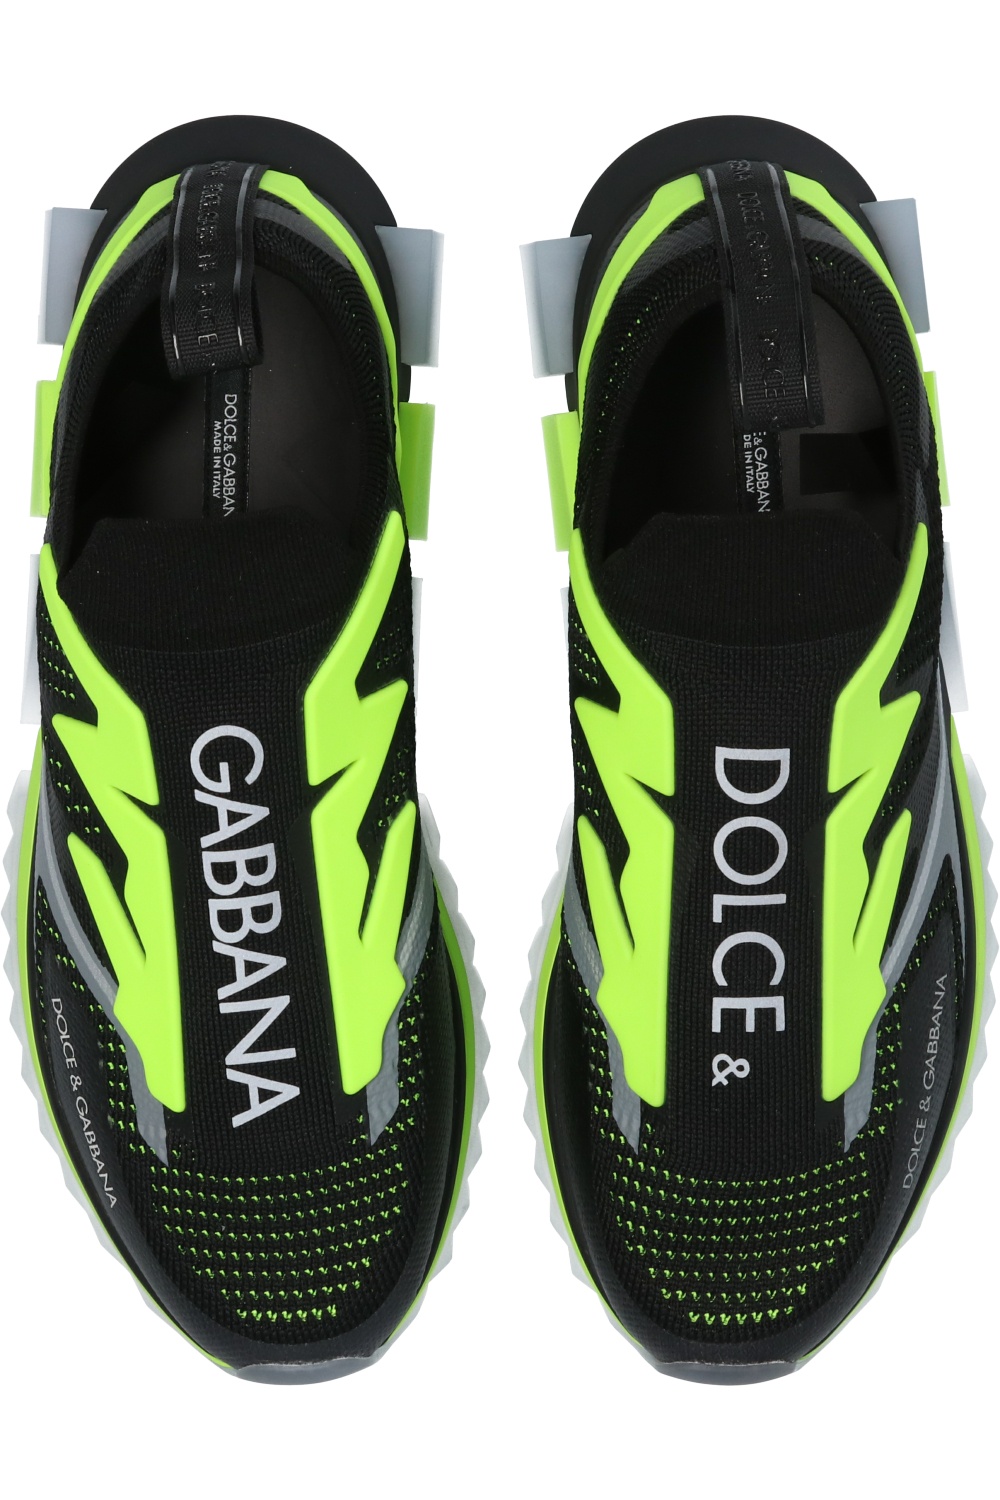 Dolce And Gabbana Shoes Lime Green Deals, SAVE 44% 